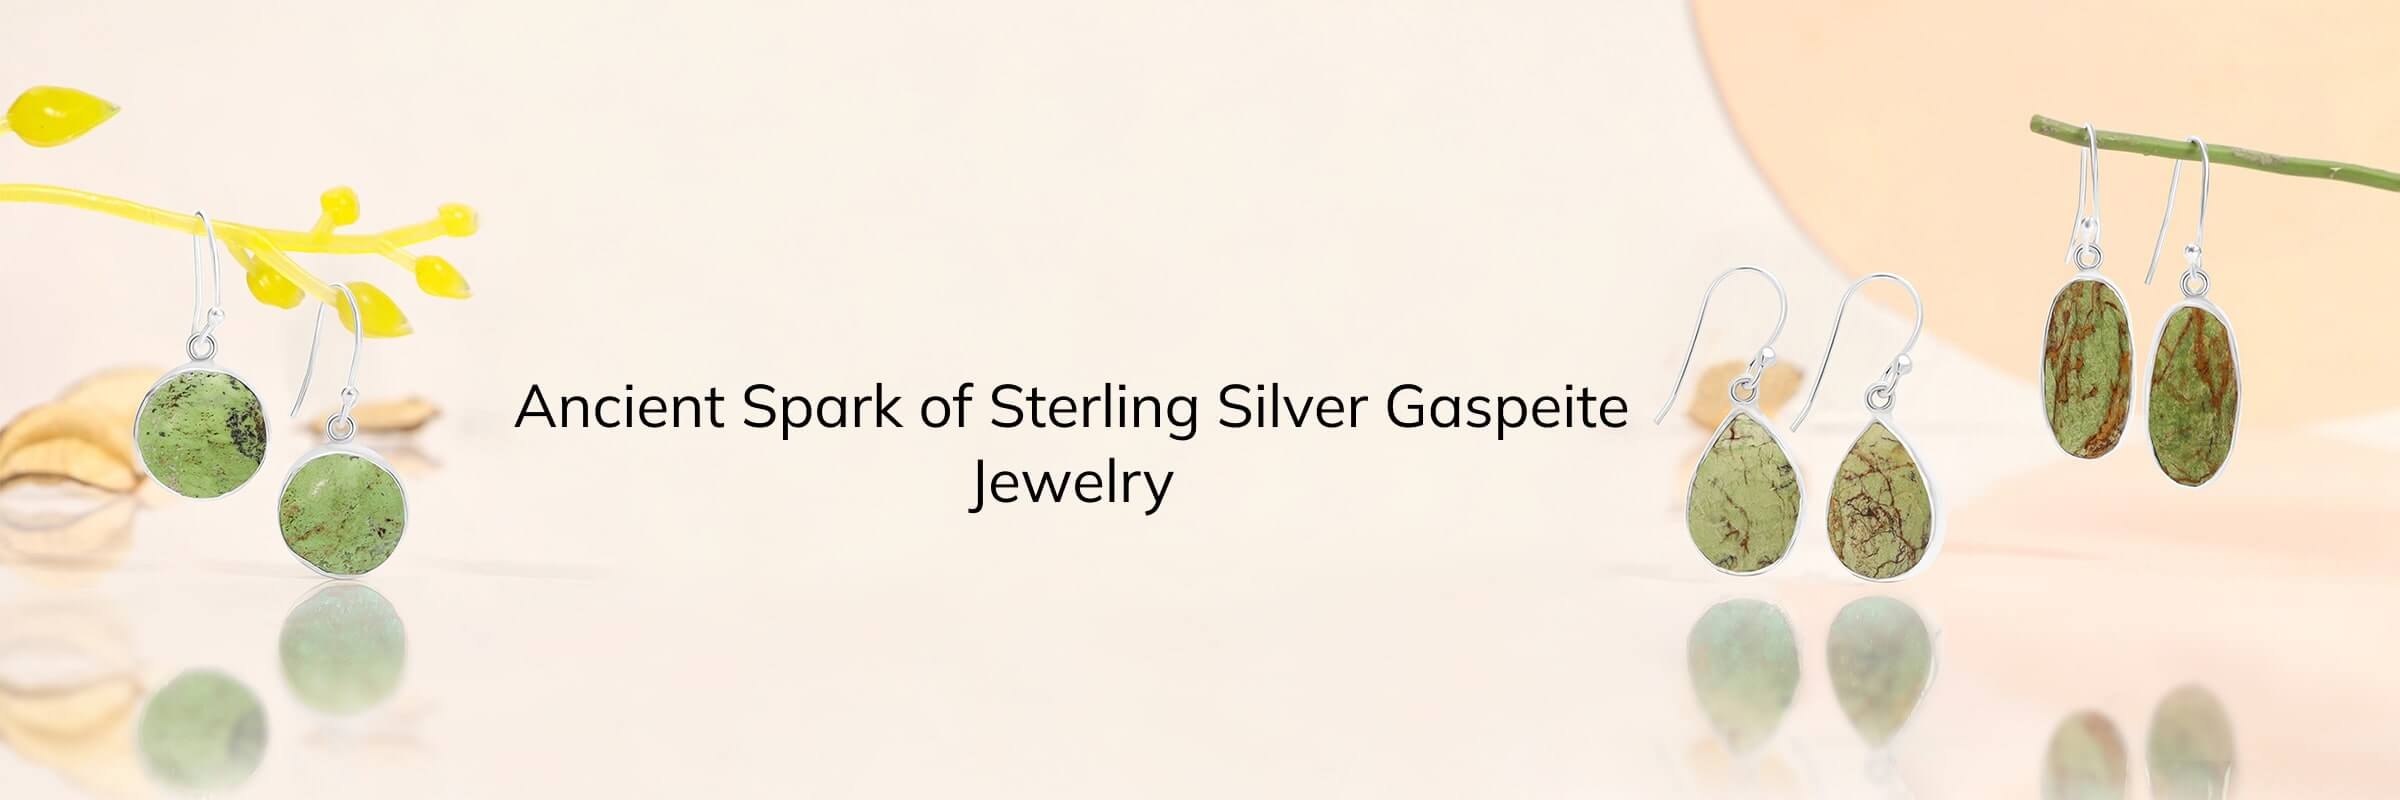 History of Sterling Silver Gaspeite Jewelry